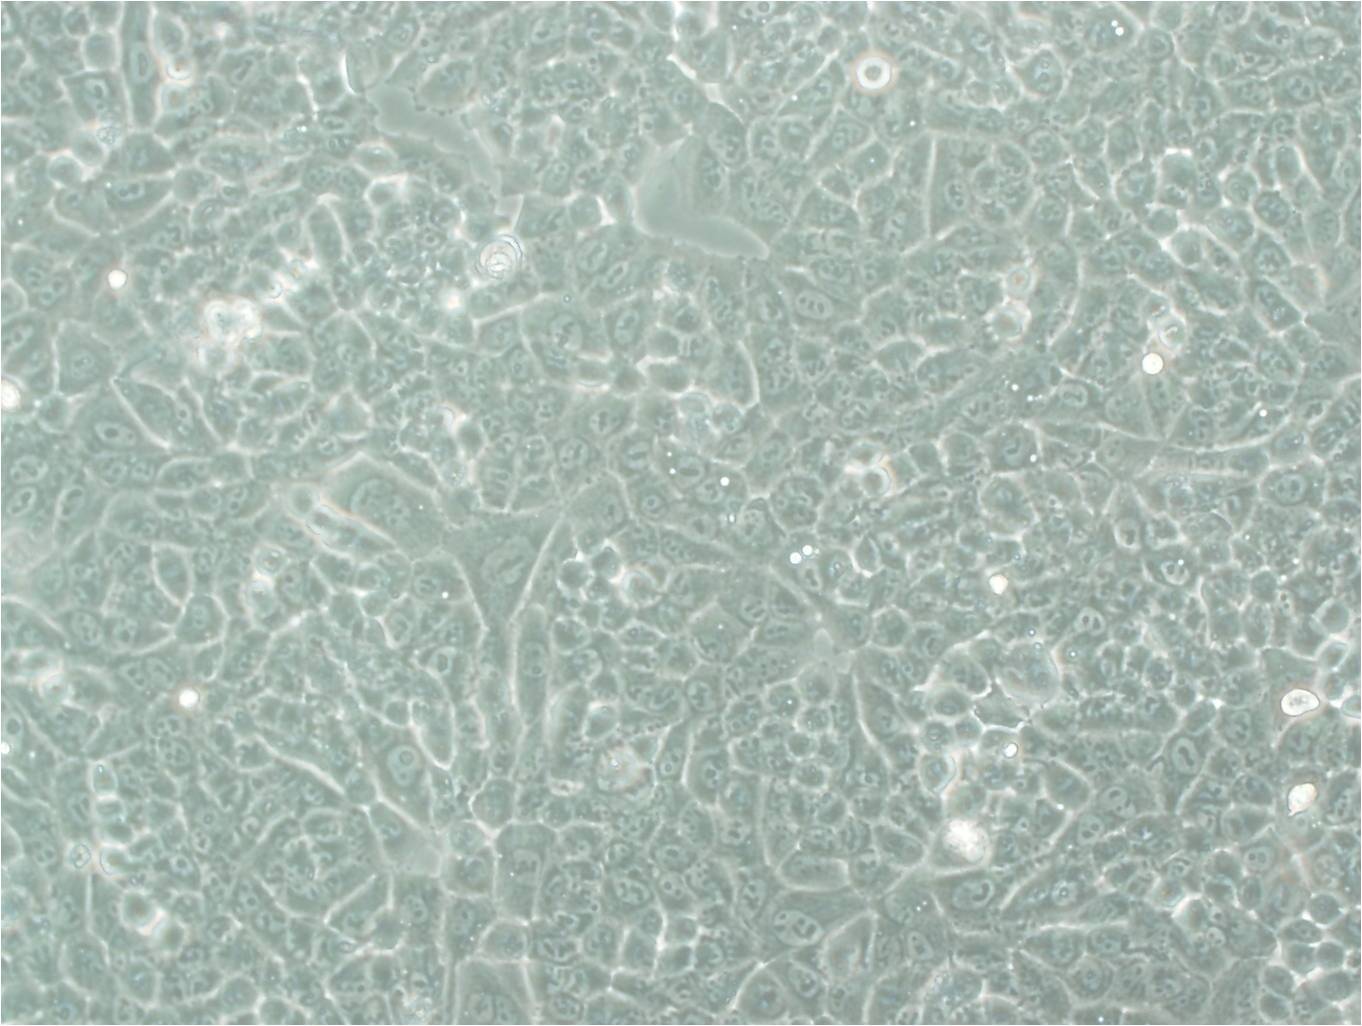 SW48 epithelioid cells人结肠腺癌细胞系,SW48 epithelioid cells